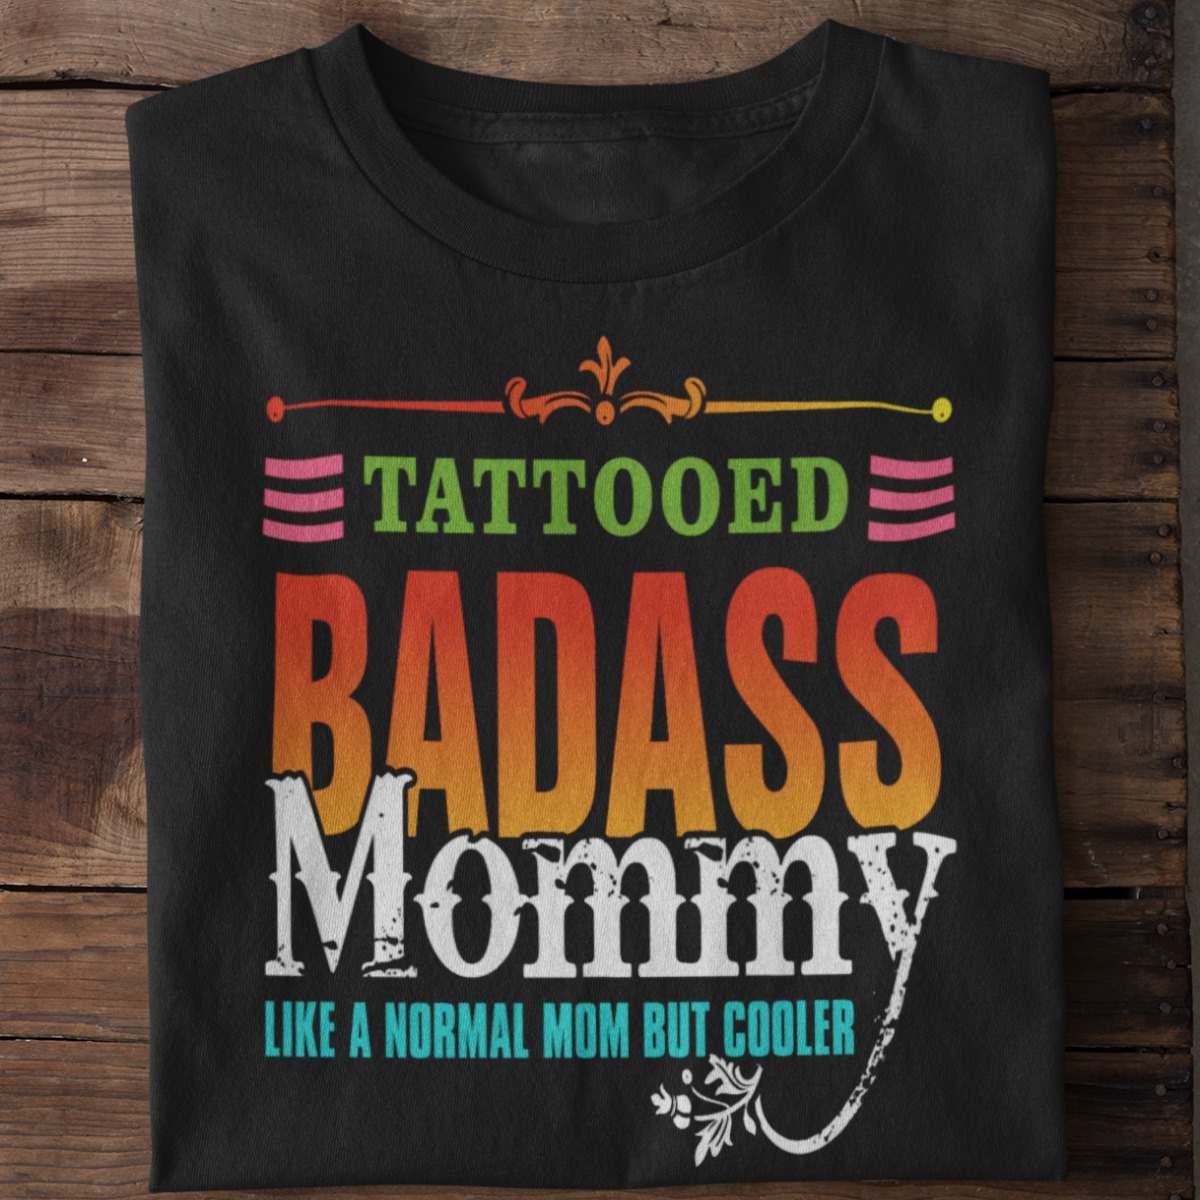 Tattooes badass mommy like a normal mom but cooler